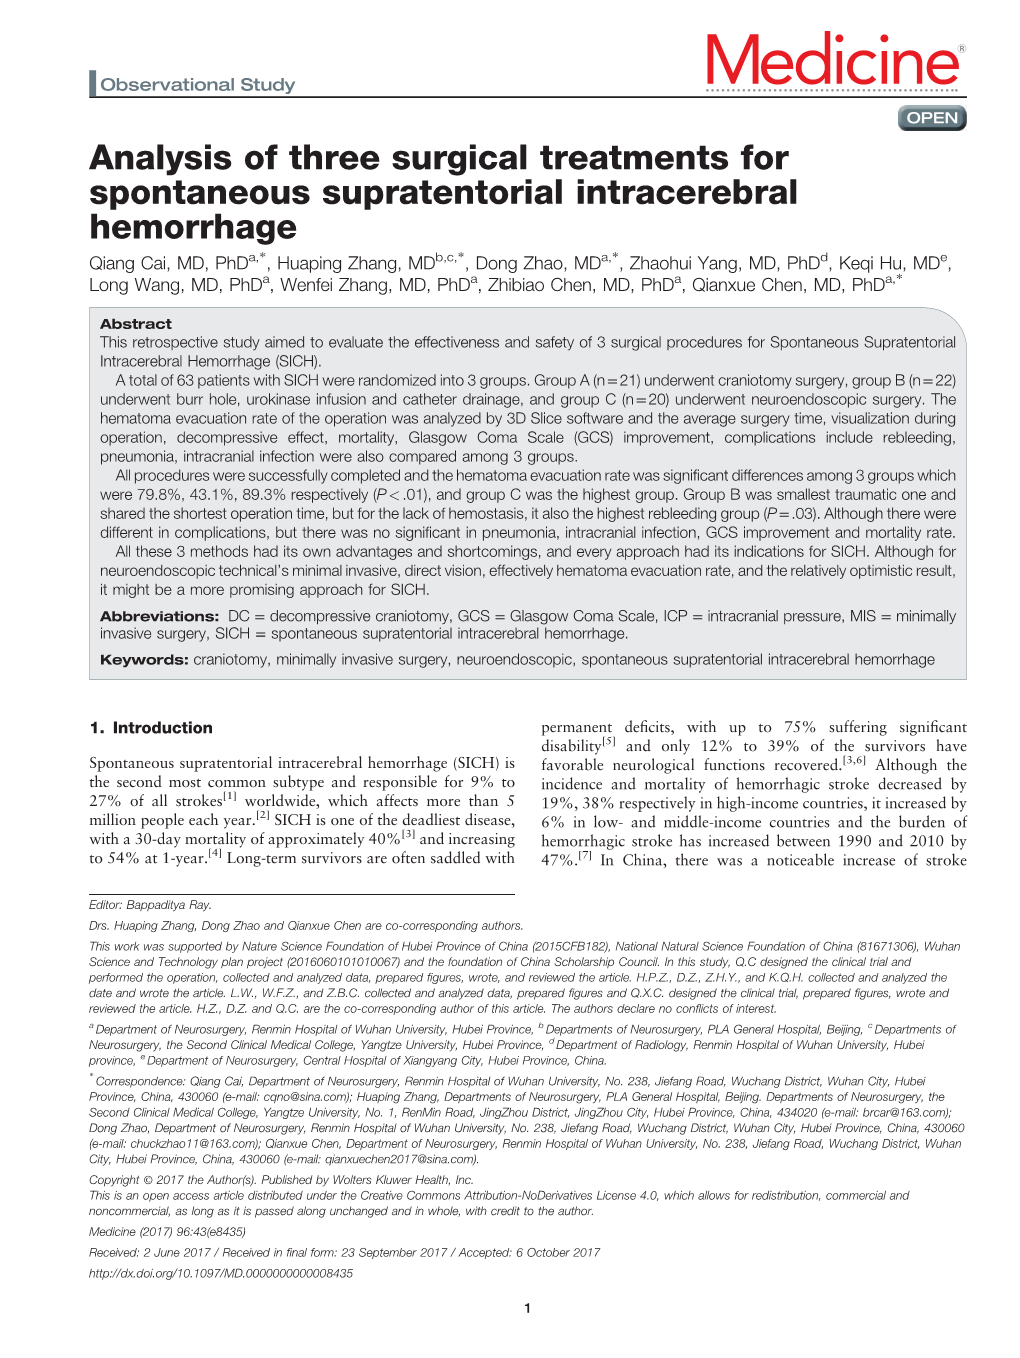 Analysis of Three Surgical Treatments for Spontaneous Supratentorial